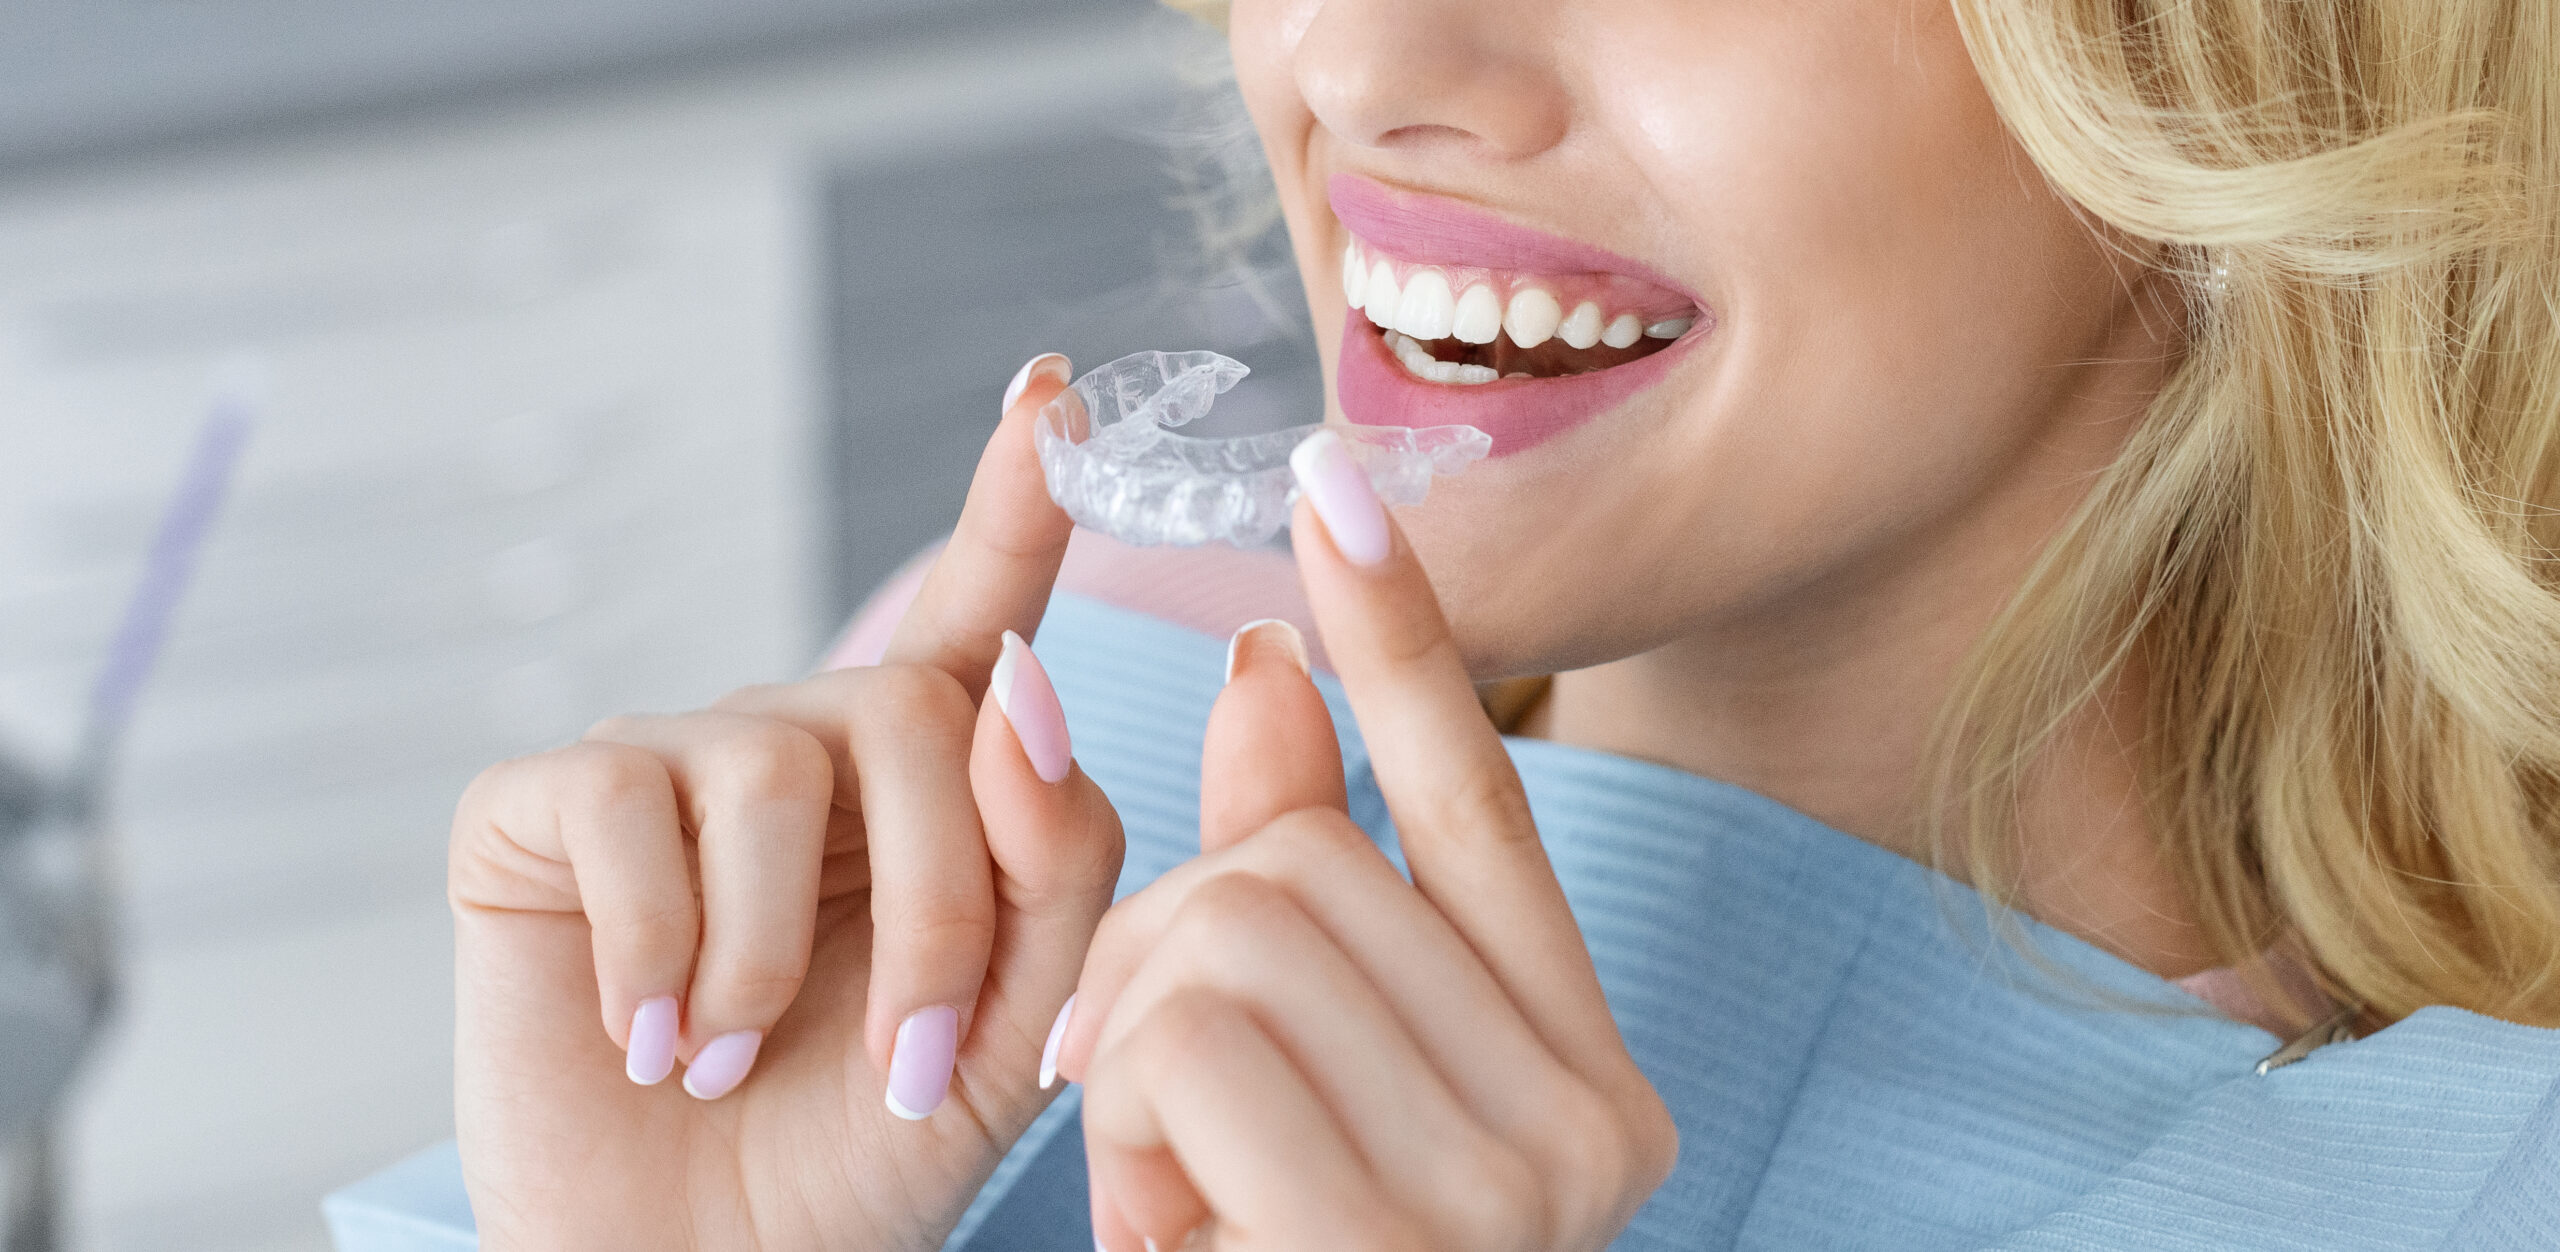 Are invisible braces right for you?